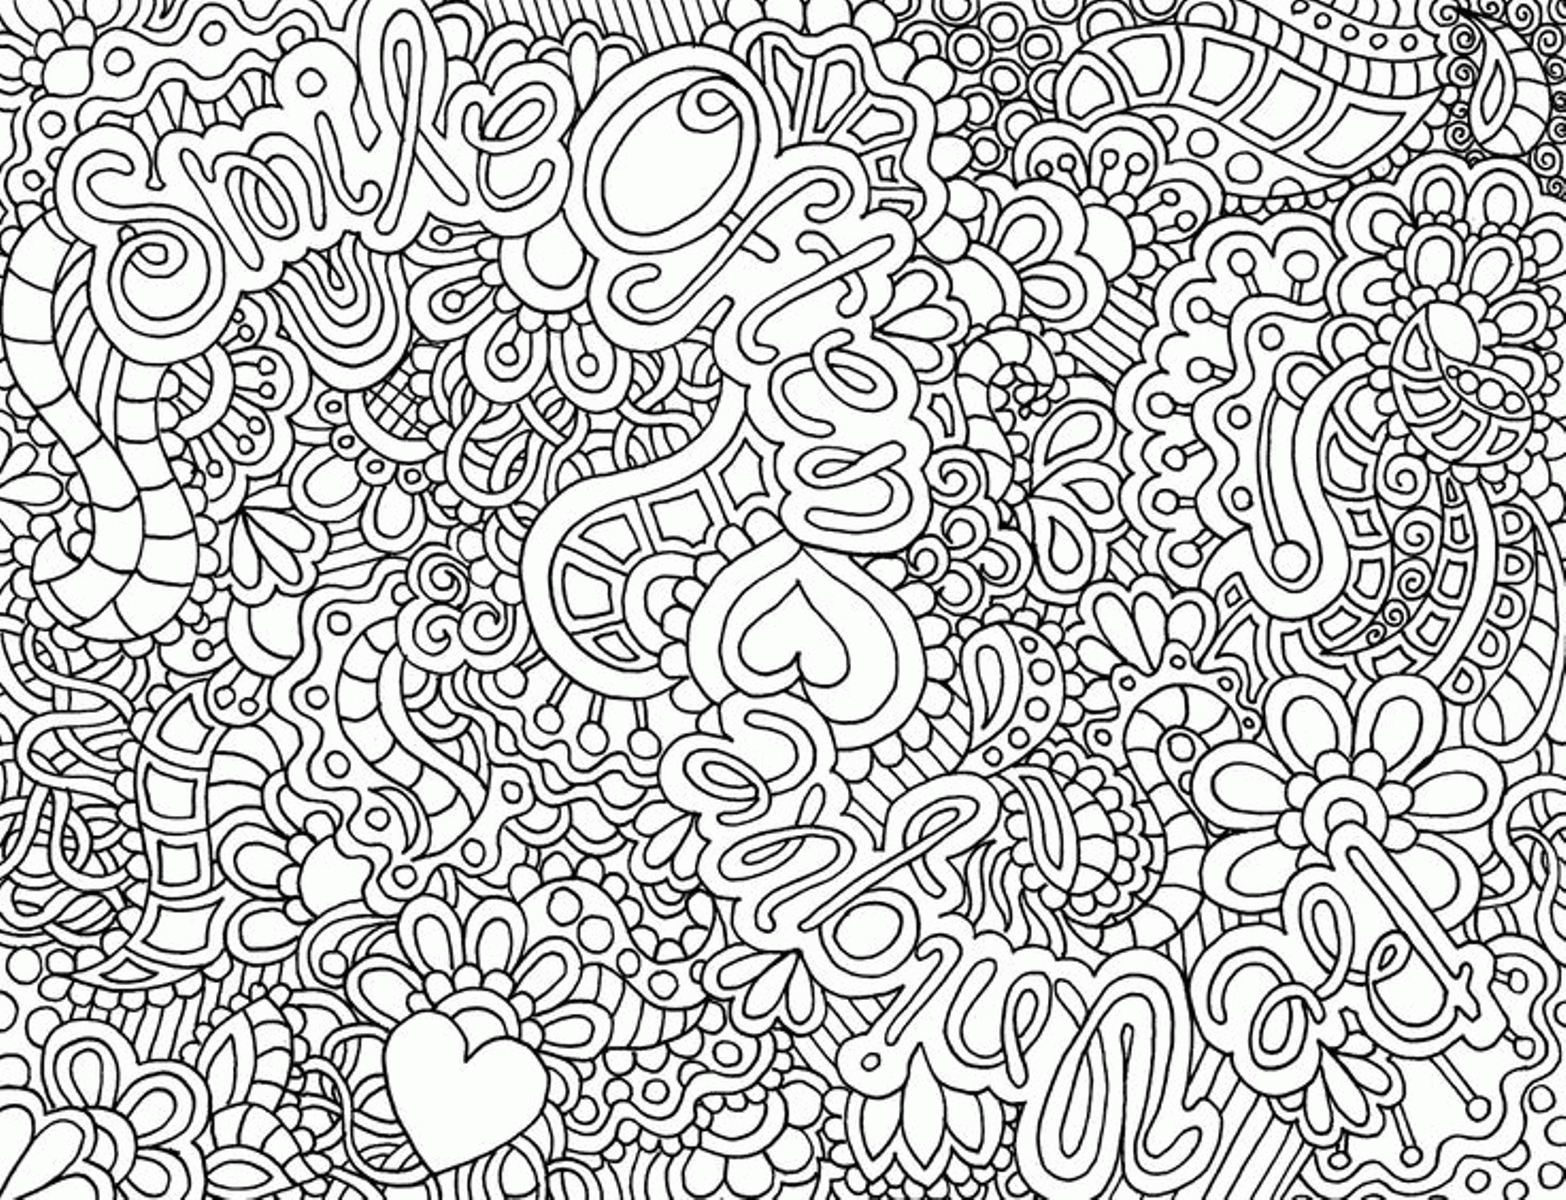 Take Hard Design Coloring Pages Getcoloringpages - Widetheme